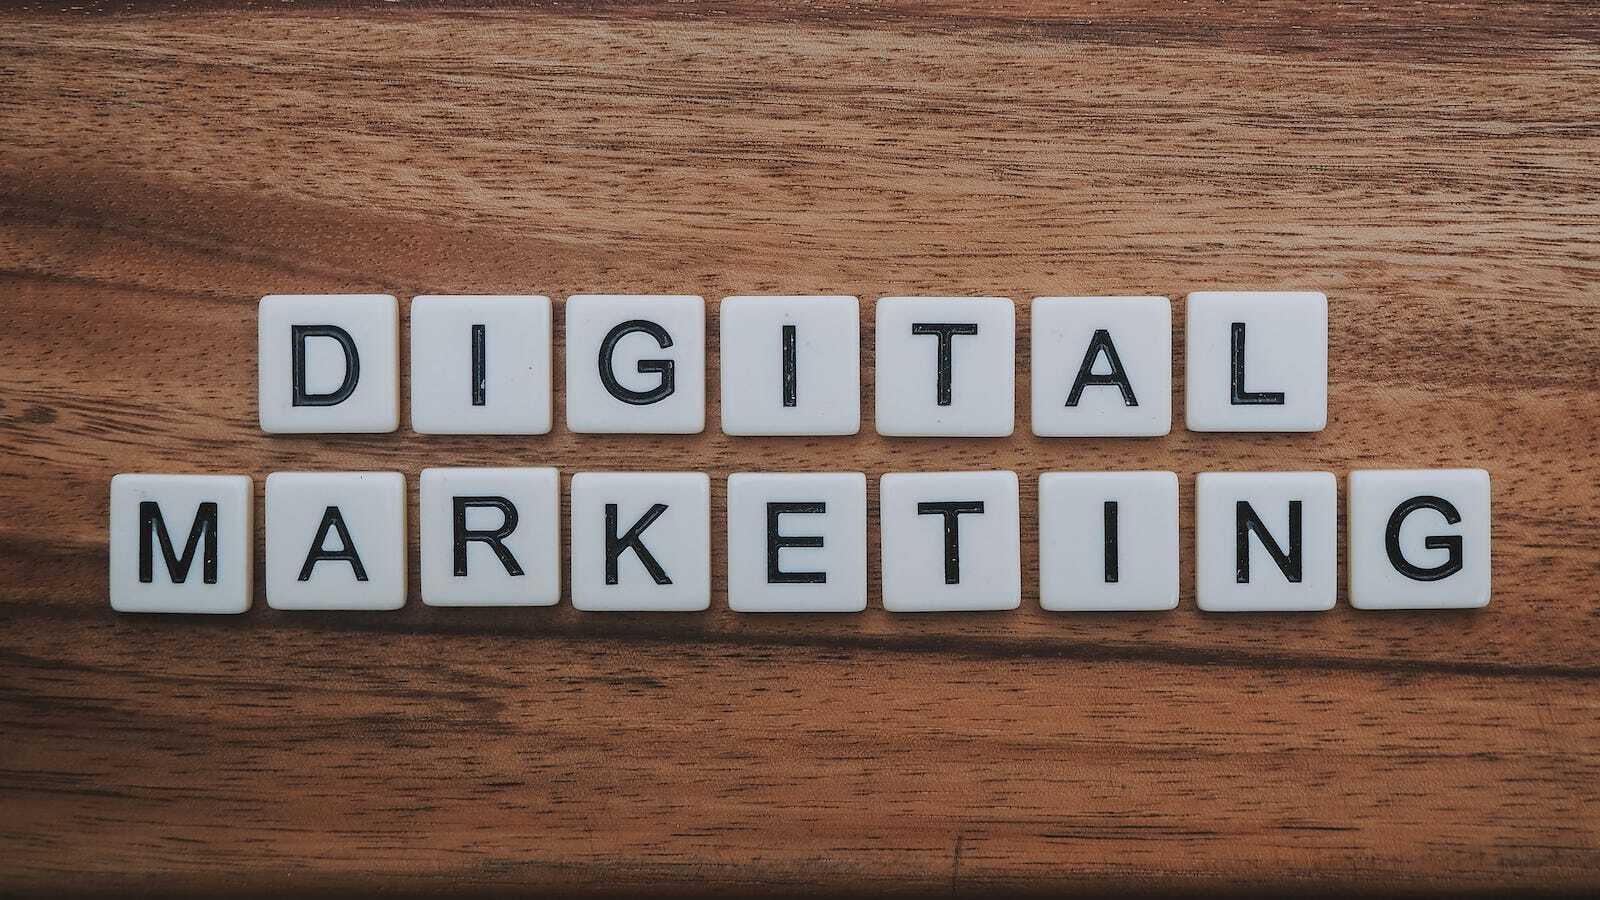 Small Business Help: 7 Signs It's Time to Hire a Digital Marketing Agency